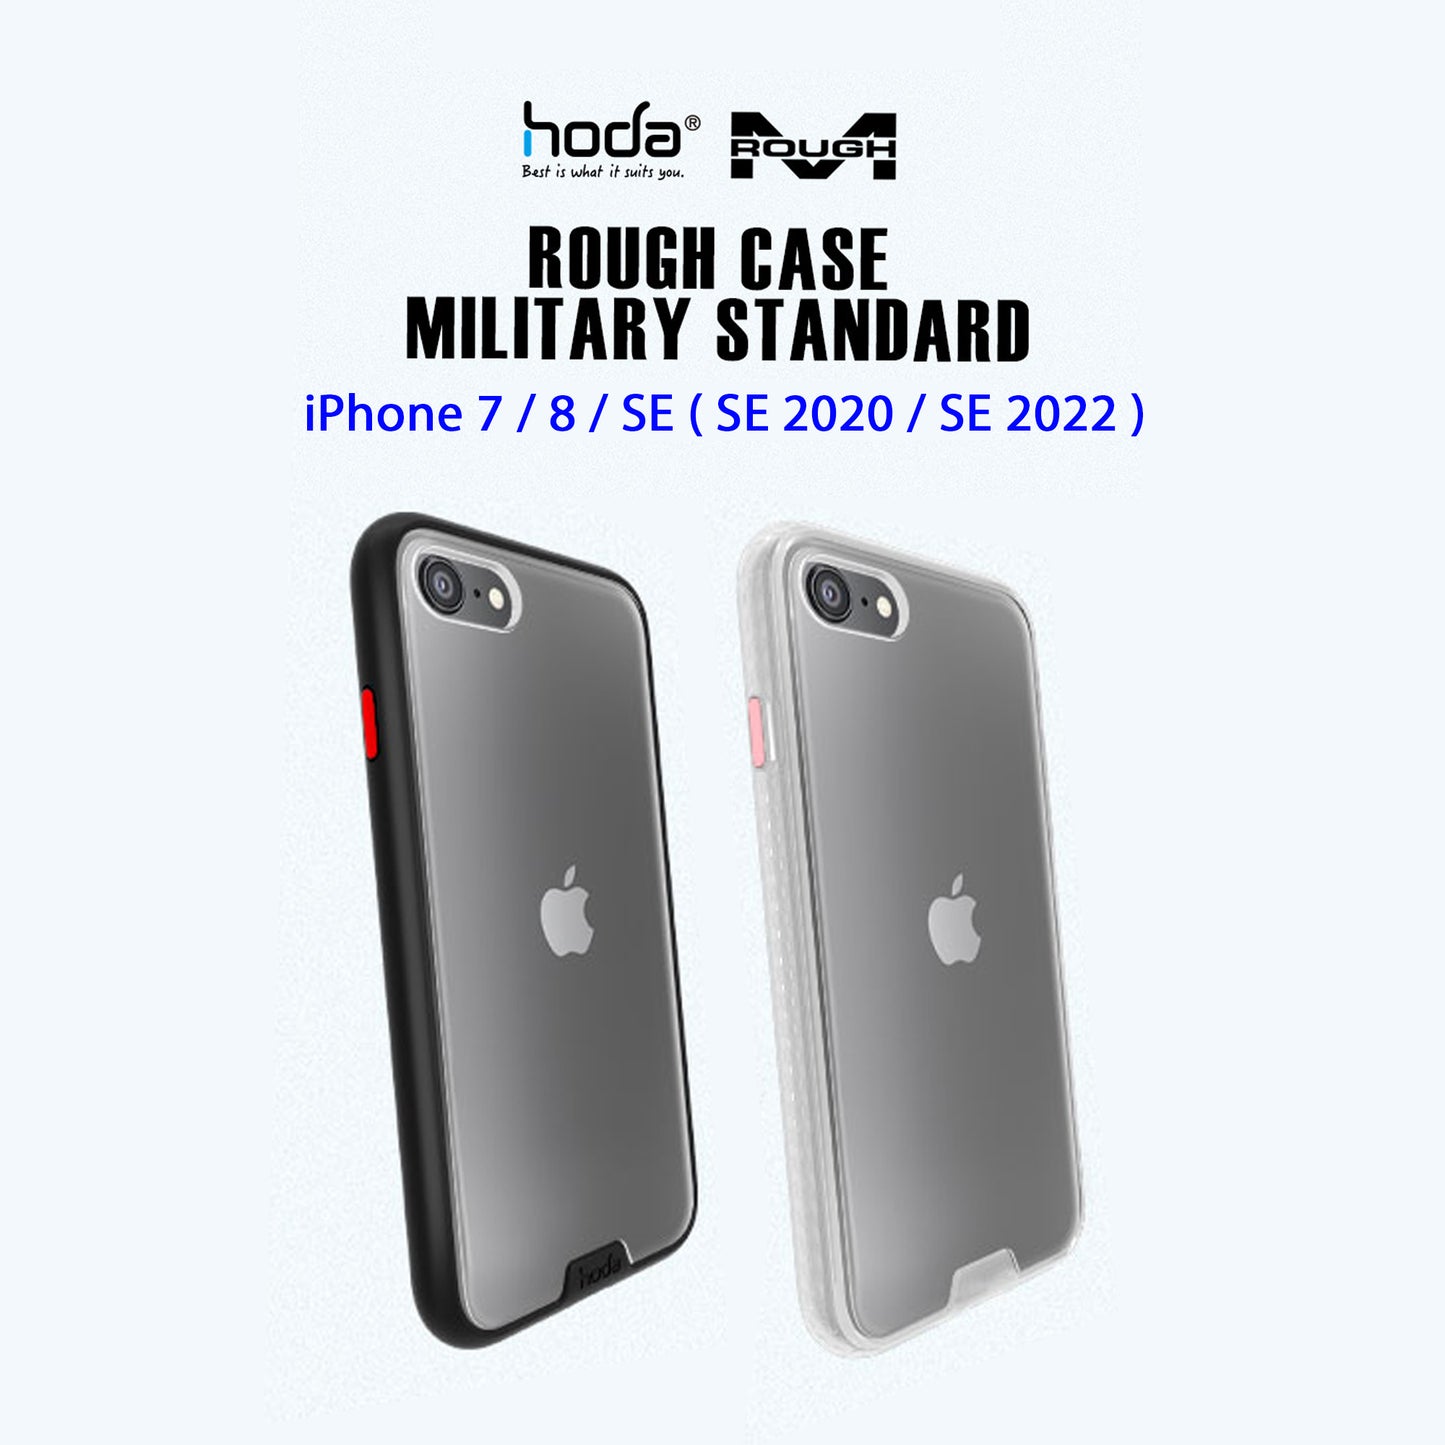 Hoda Rough Military Case for iPhone SE ( 2022 - 2020 ) compatible with iPhone 7 - 8 - Black ( Barcode : 4713381516843 )